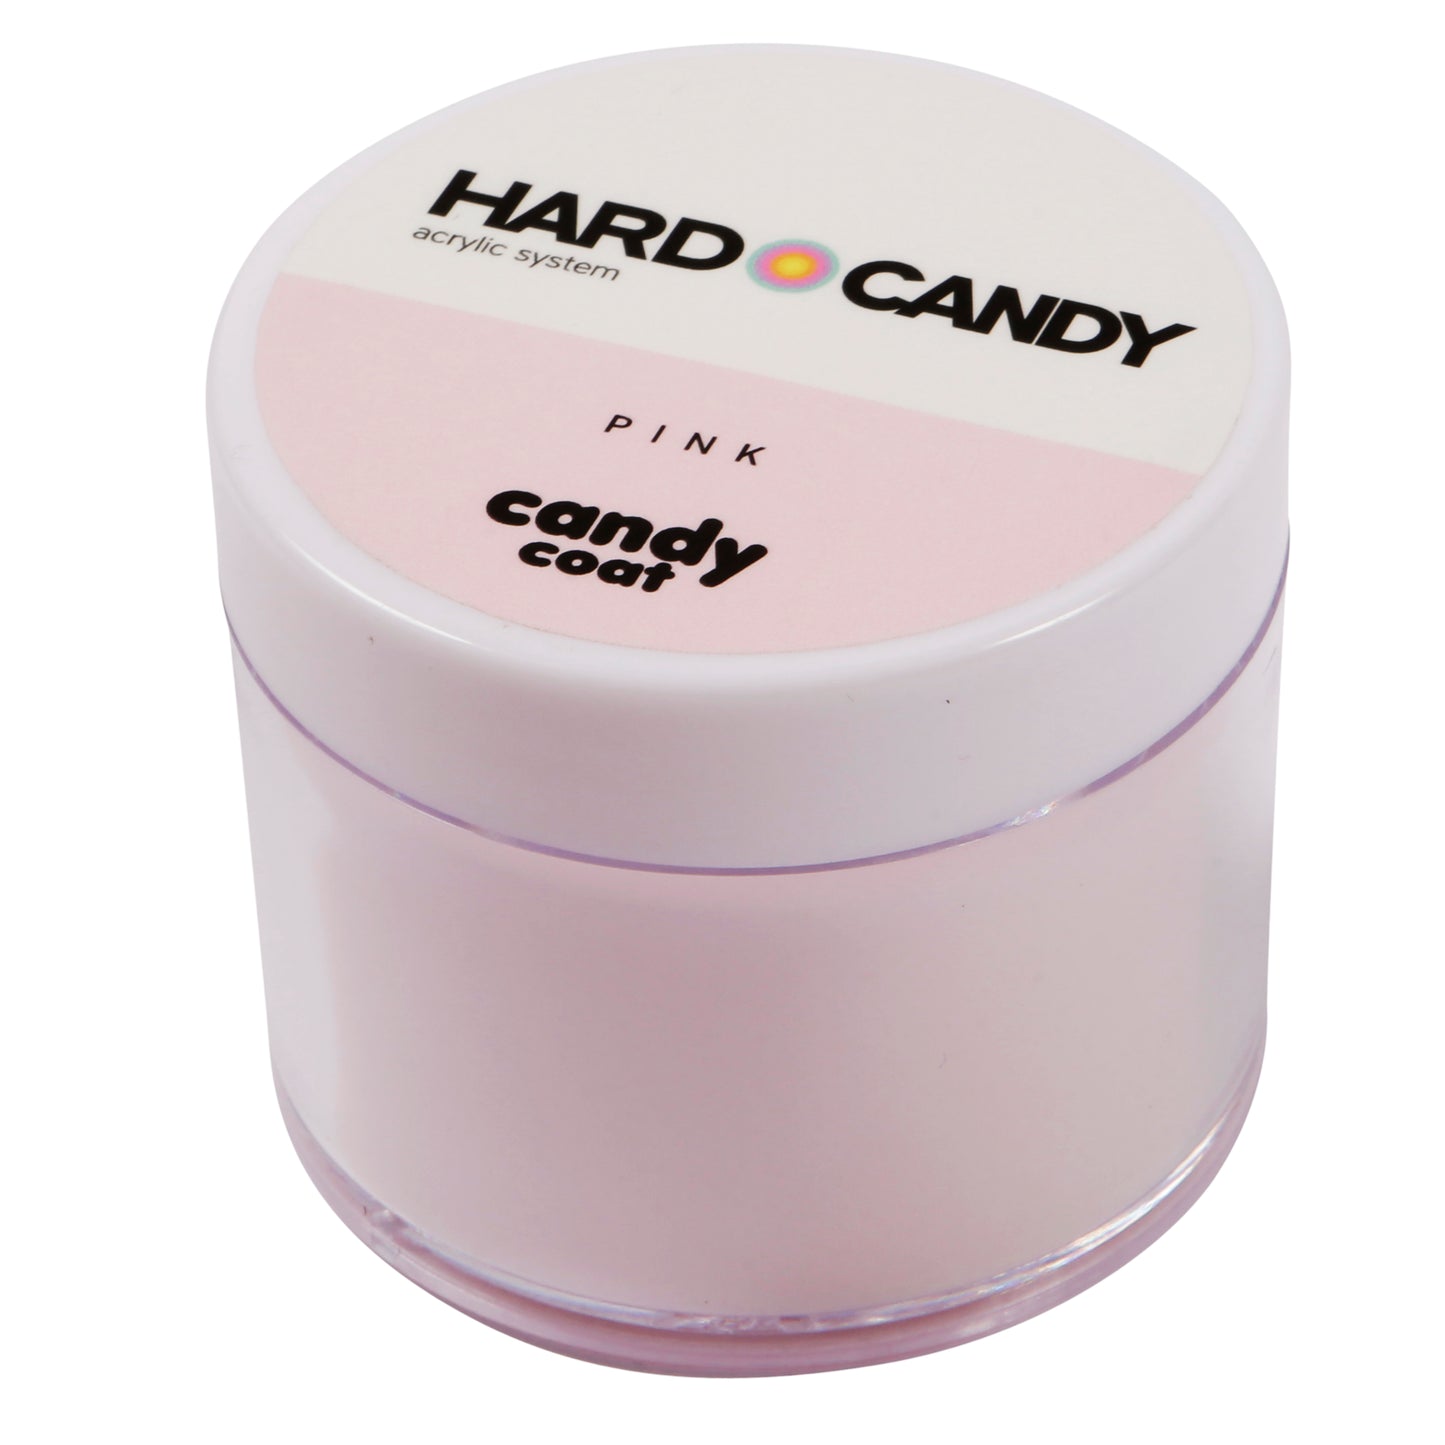 Hard Candy Acrylic - Pink - Candy Coat